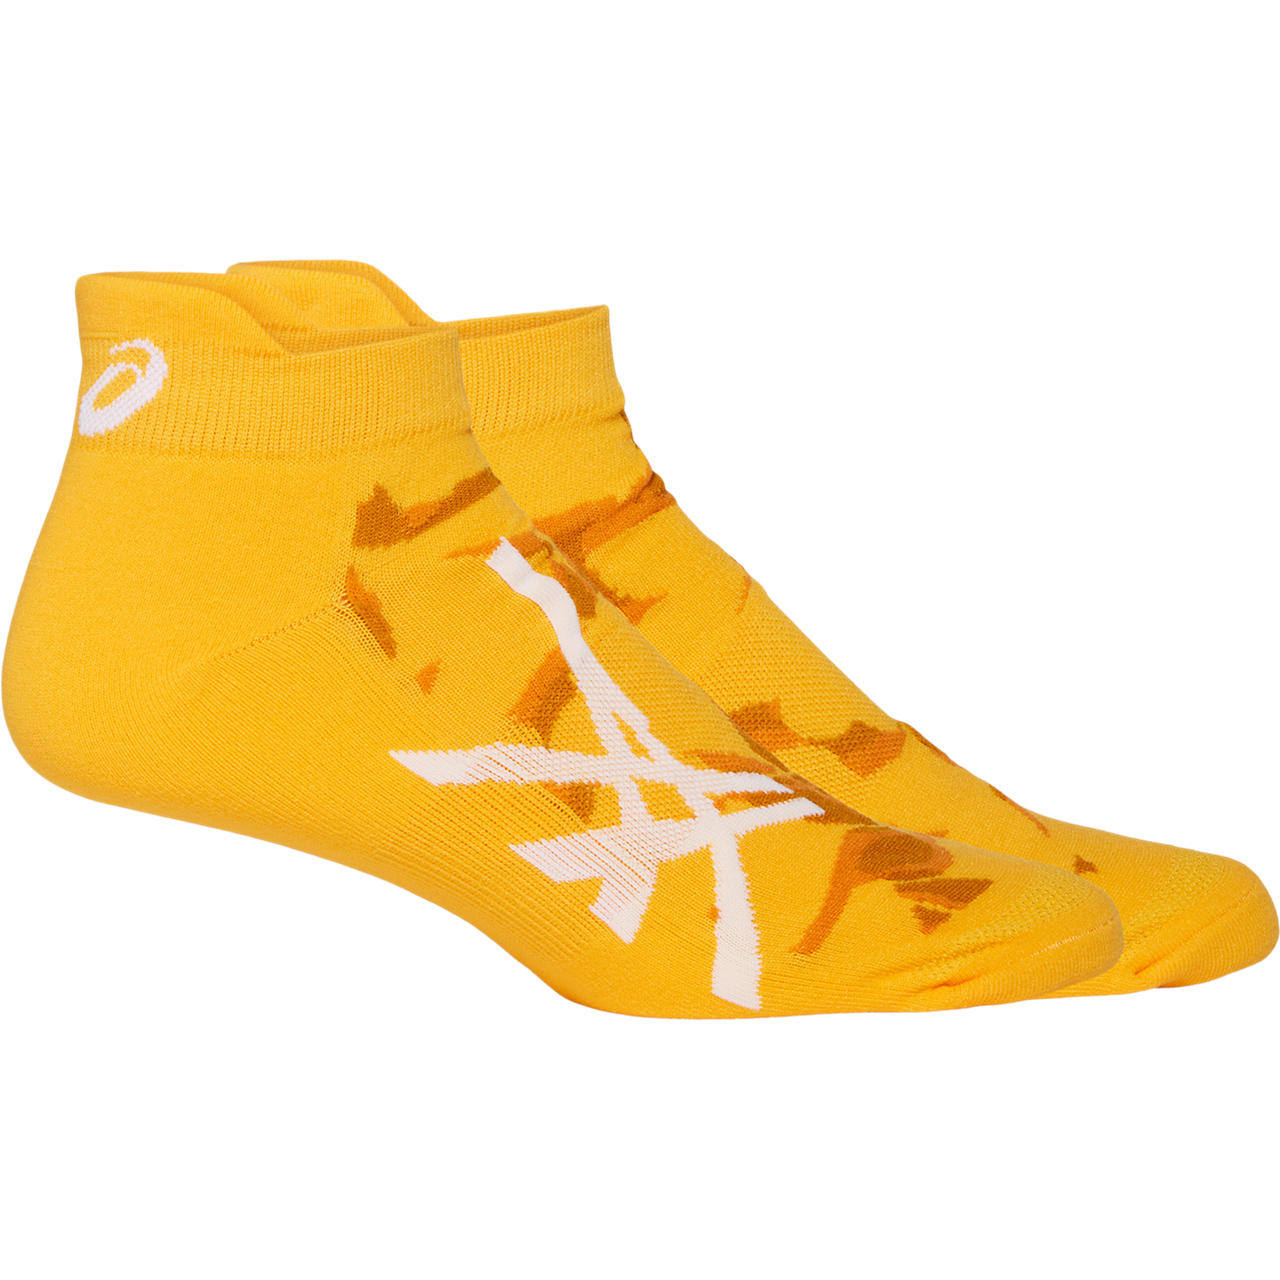 ASICS ROAD GRAPHIC LOW, TIGER YELLOW/BRILLIANT WHITE, swatch